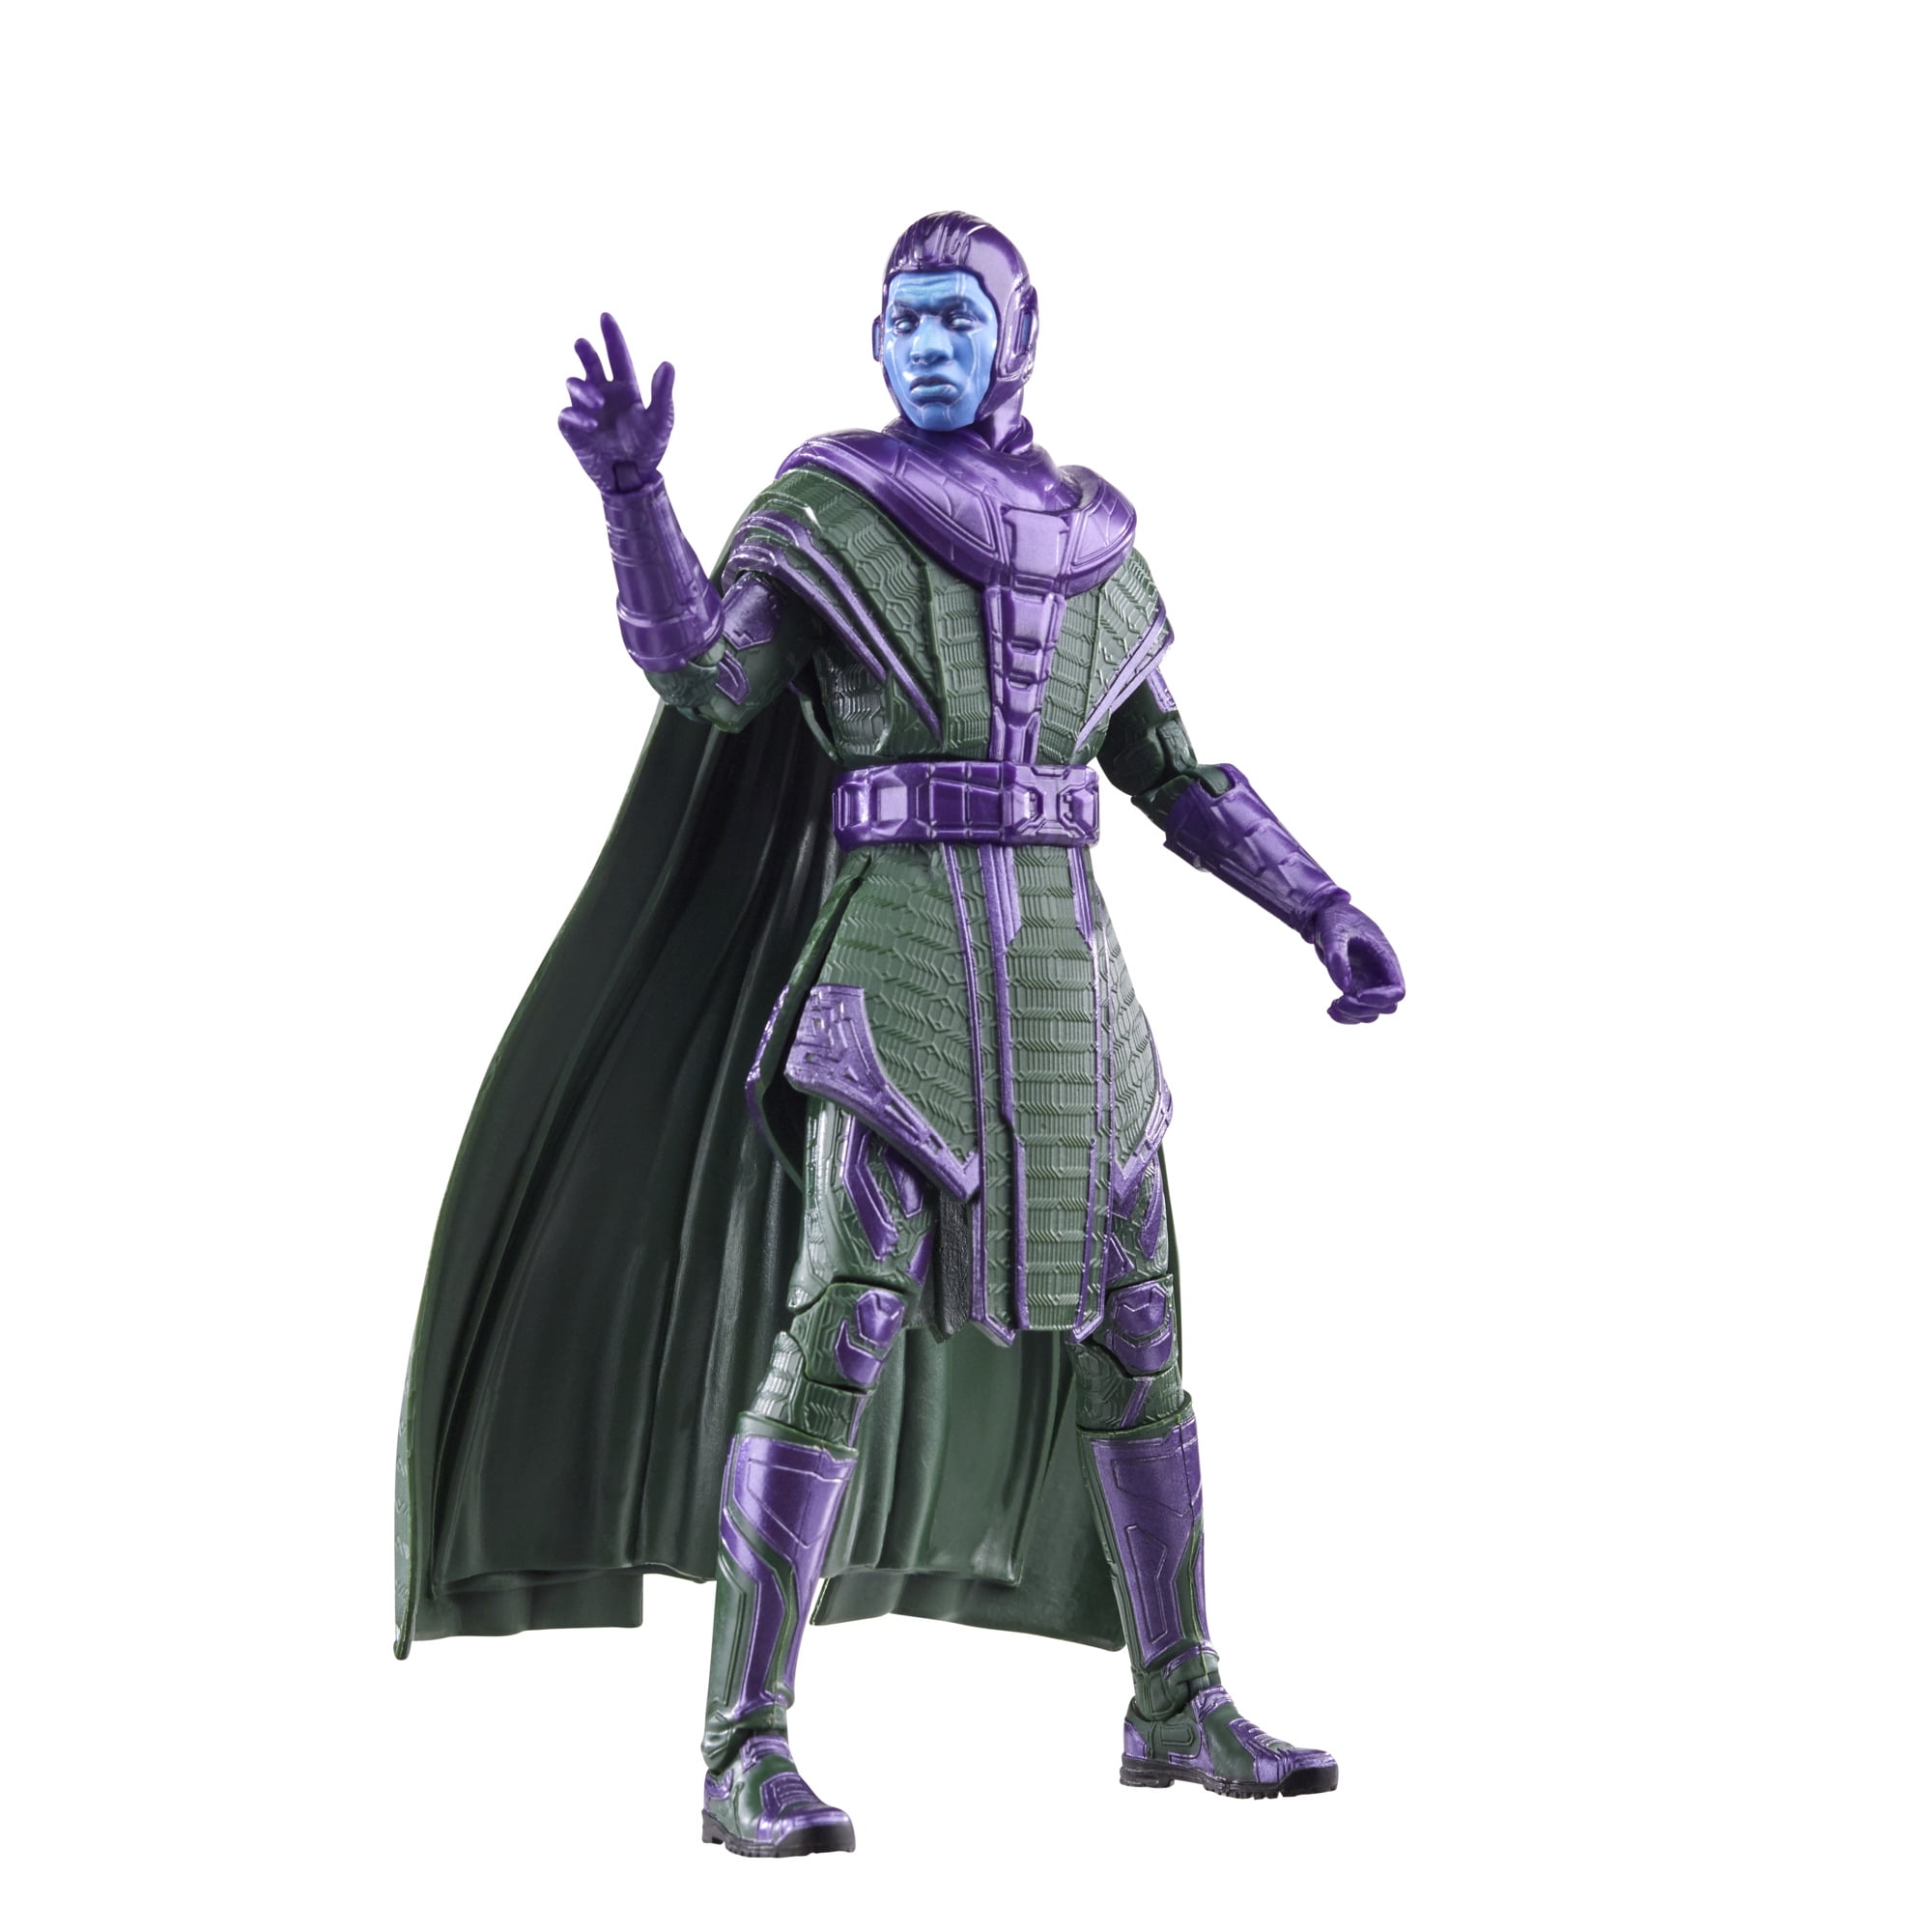 Today on GEN we are unboxing the Marvel Legends Kang The Conqueror act